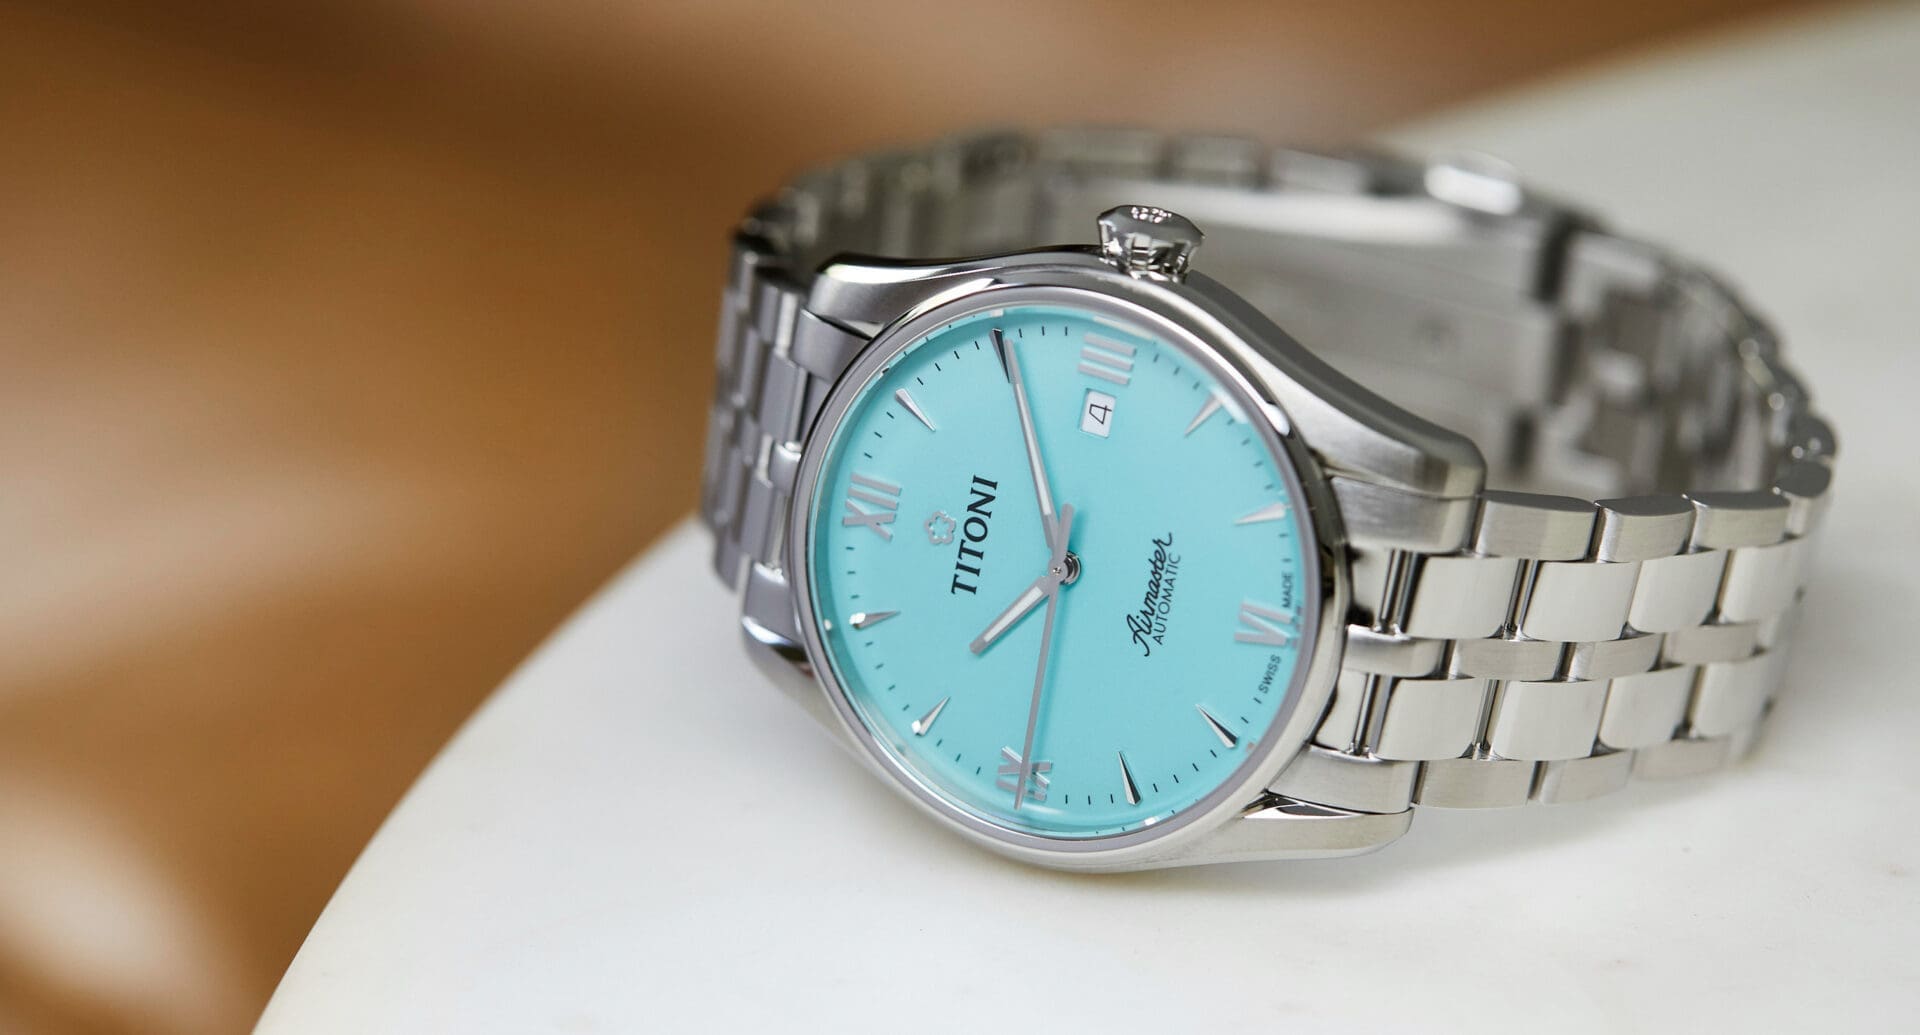 HANDS-ON: The Titoni Airmaster delivers classic vibes and a dial in ‘glacier turquoise’